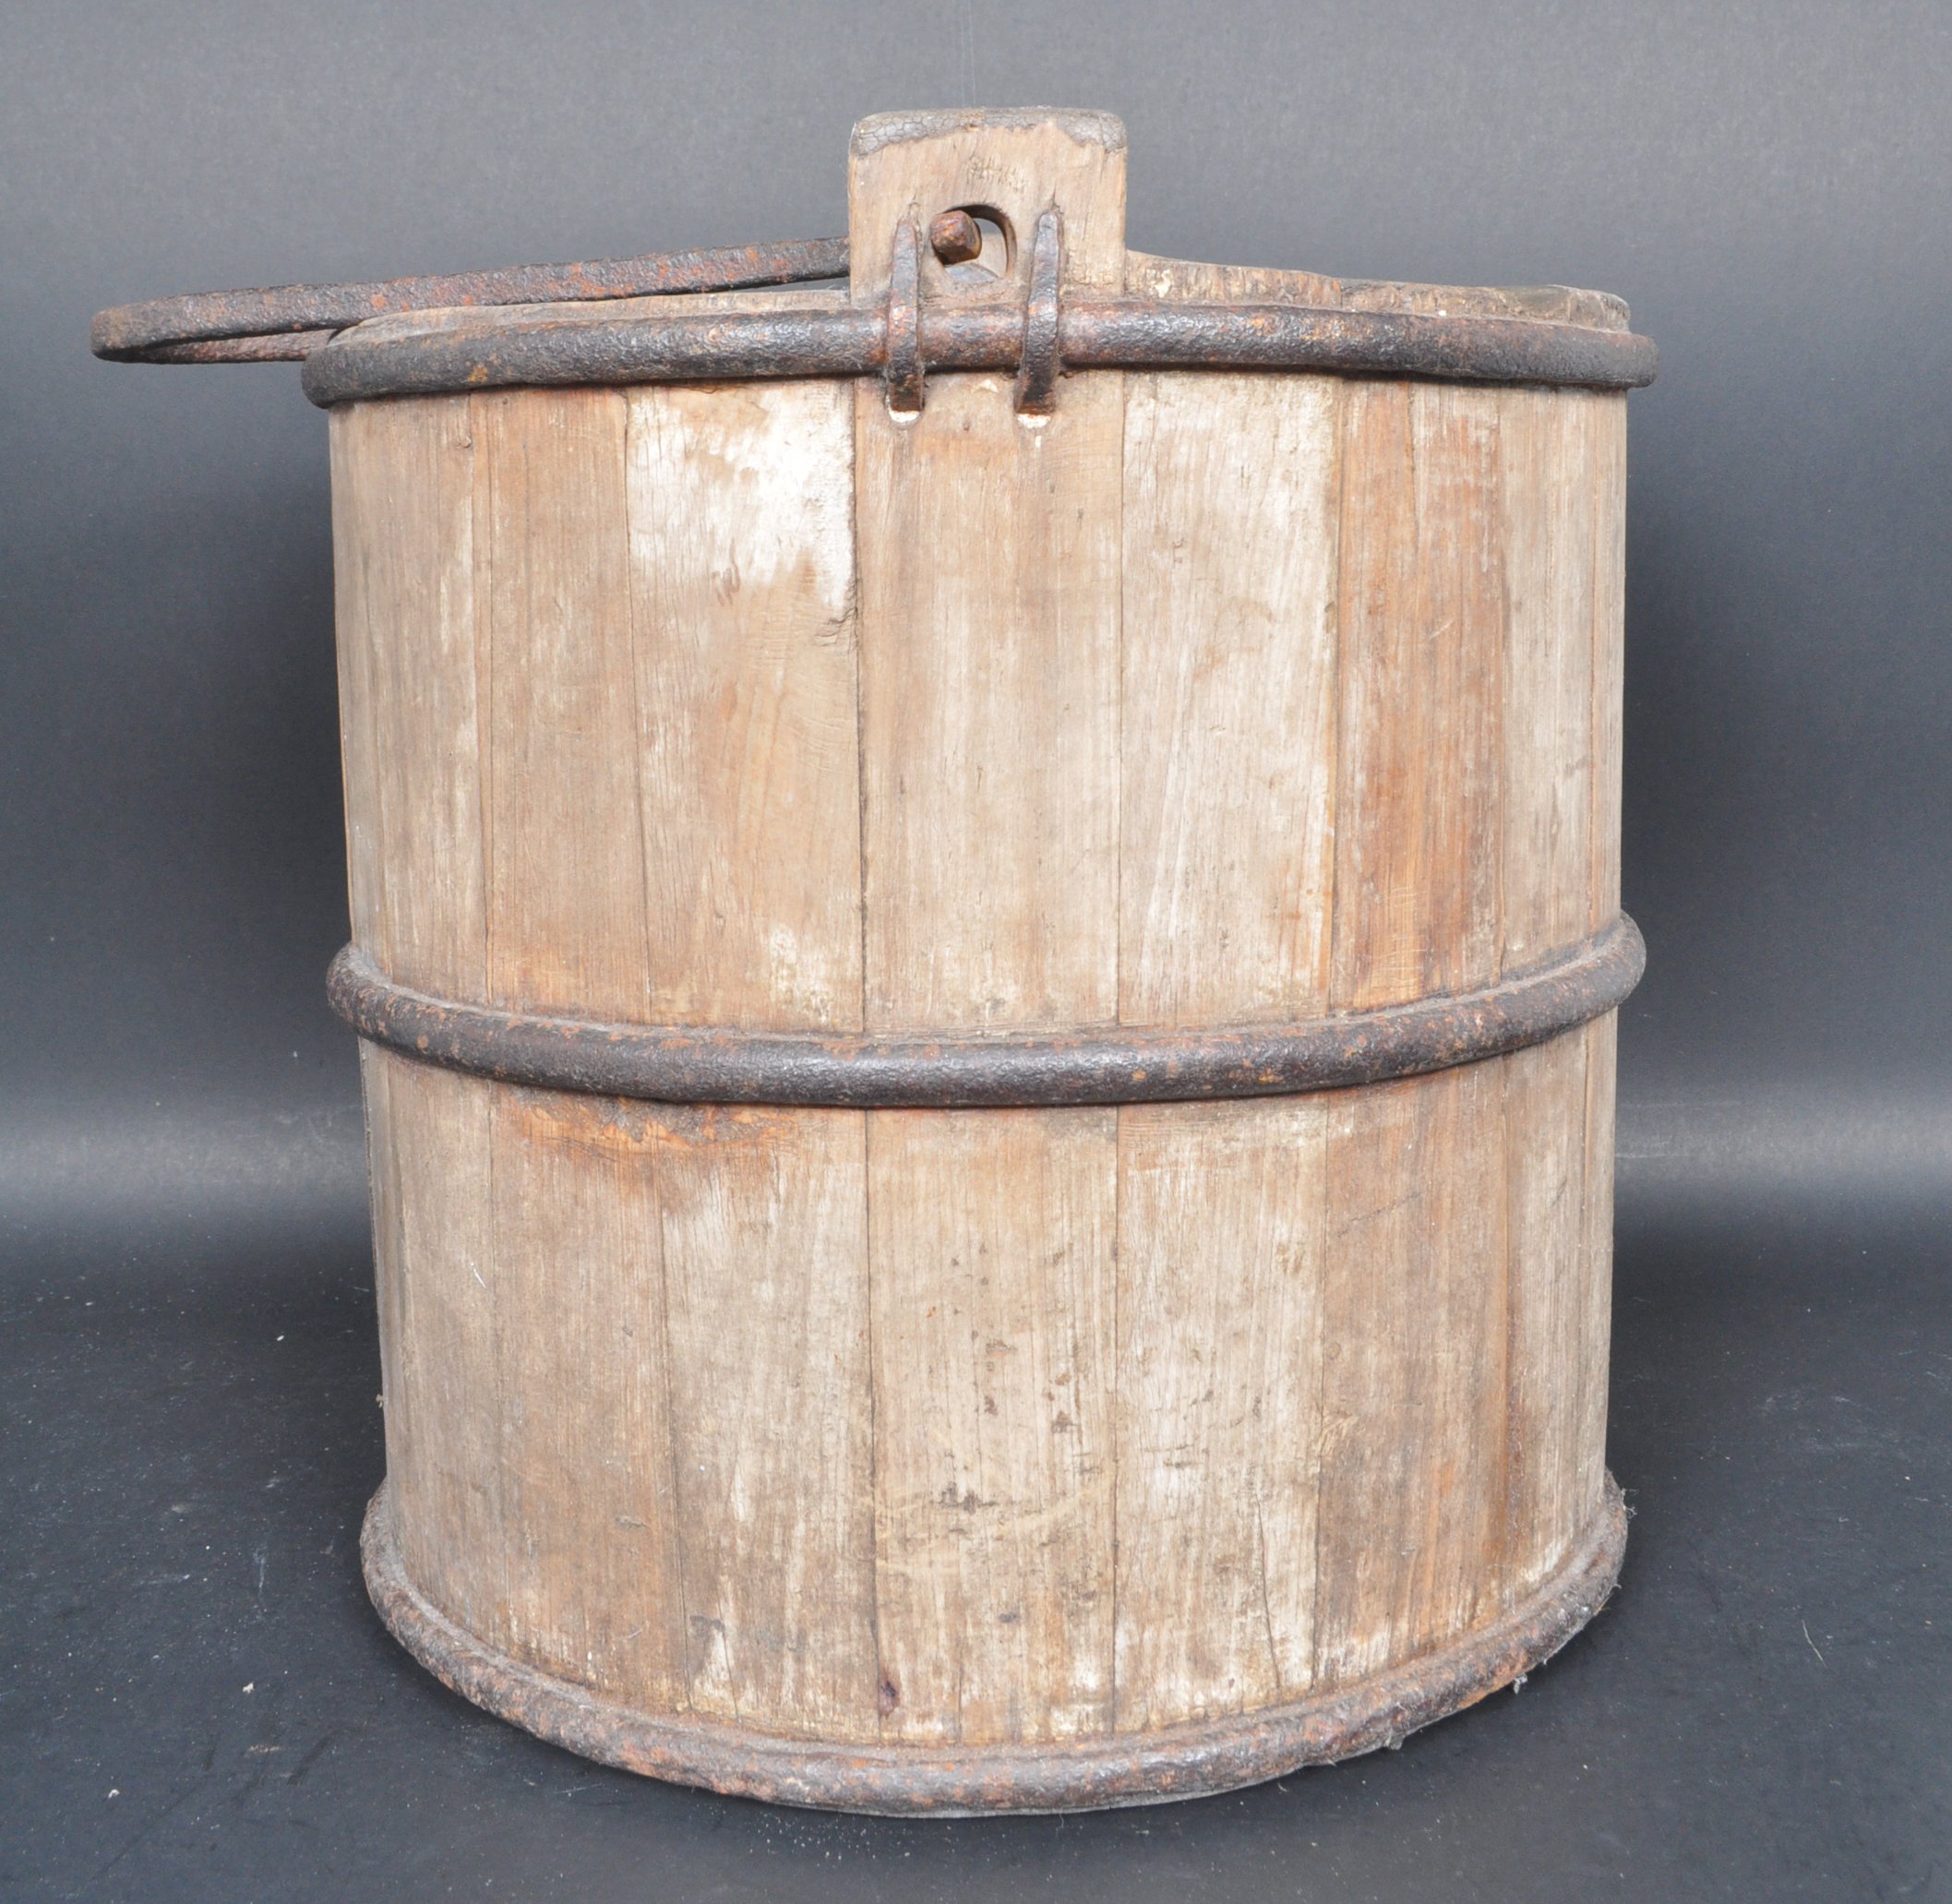 LARGE CONTINENTAL FARM HOUSE WOODEN BUCKET - Image 3 of 6